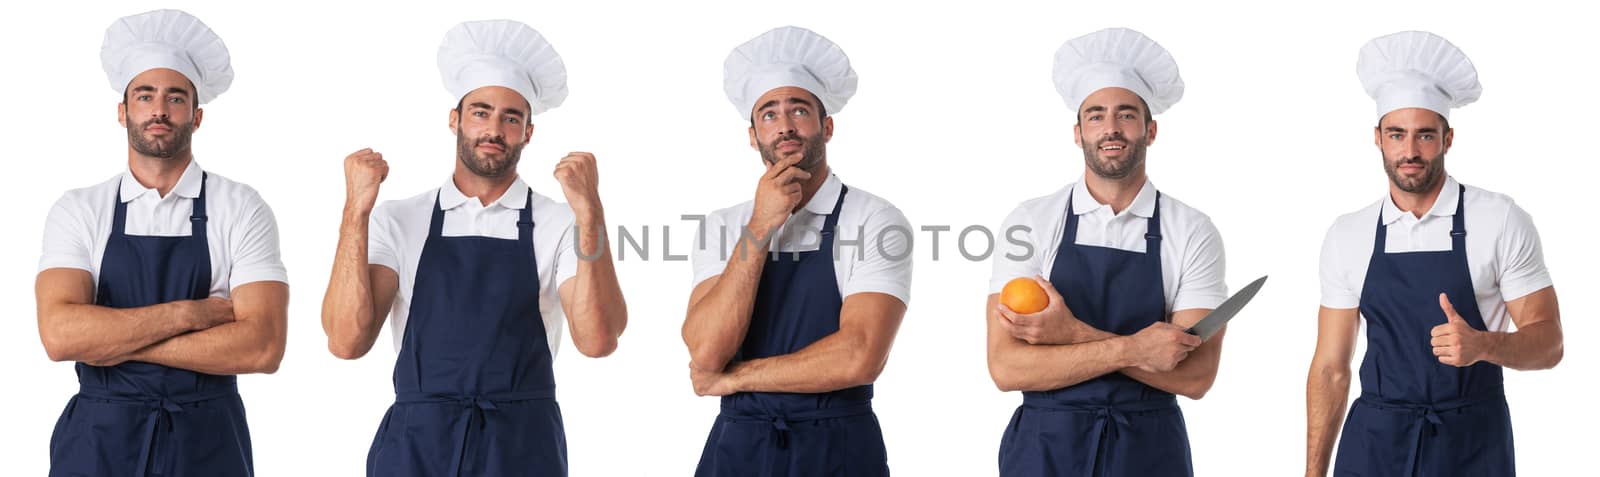 Cook or chef man set isolated on white by ALotOfPeople